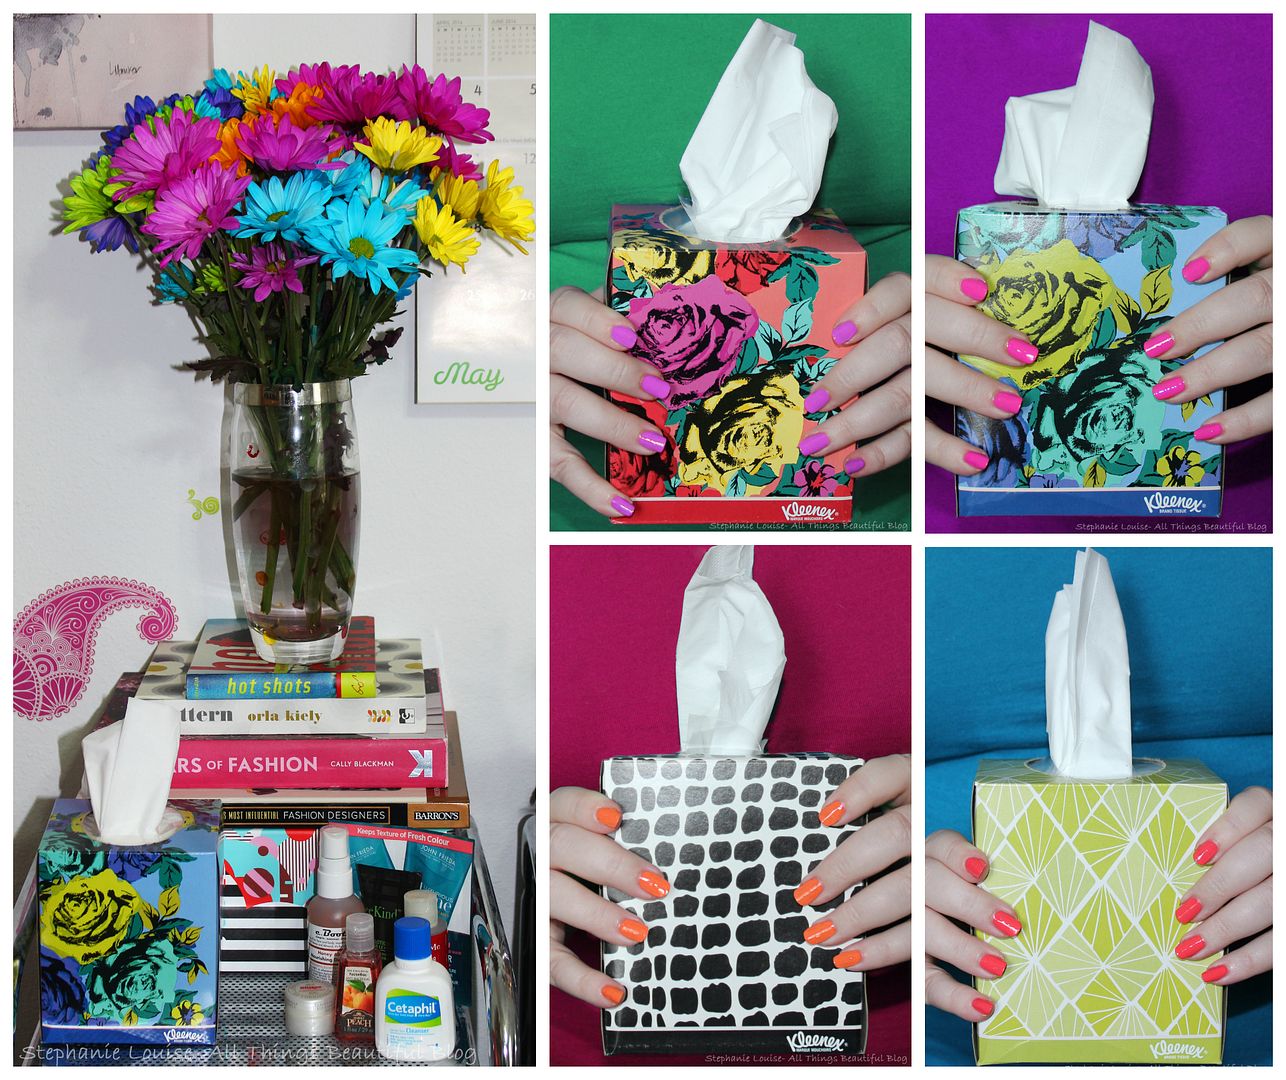 Kleenex Make Your Guests Feel Welcome with Isaac Mizrahi Design Review